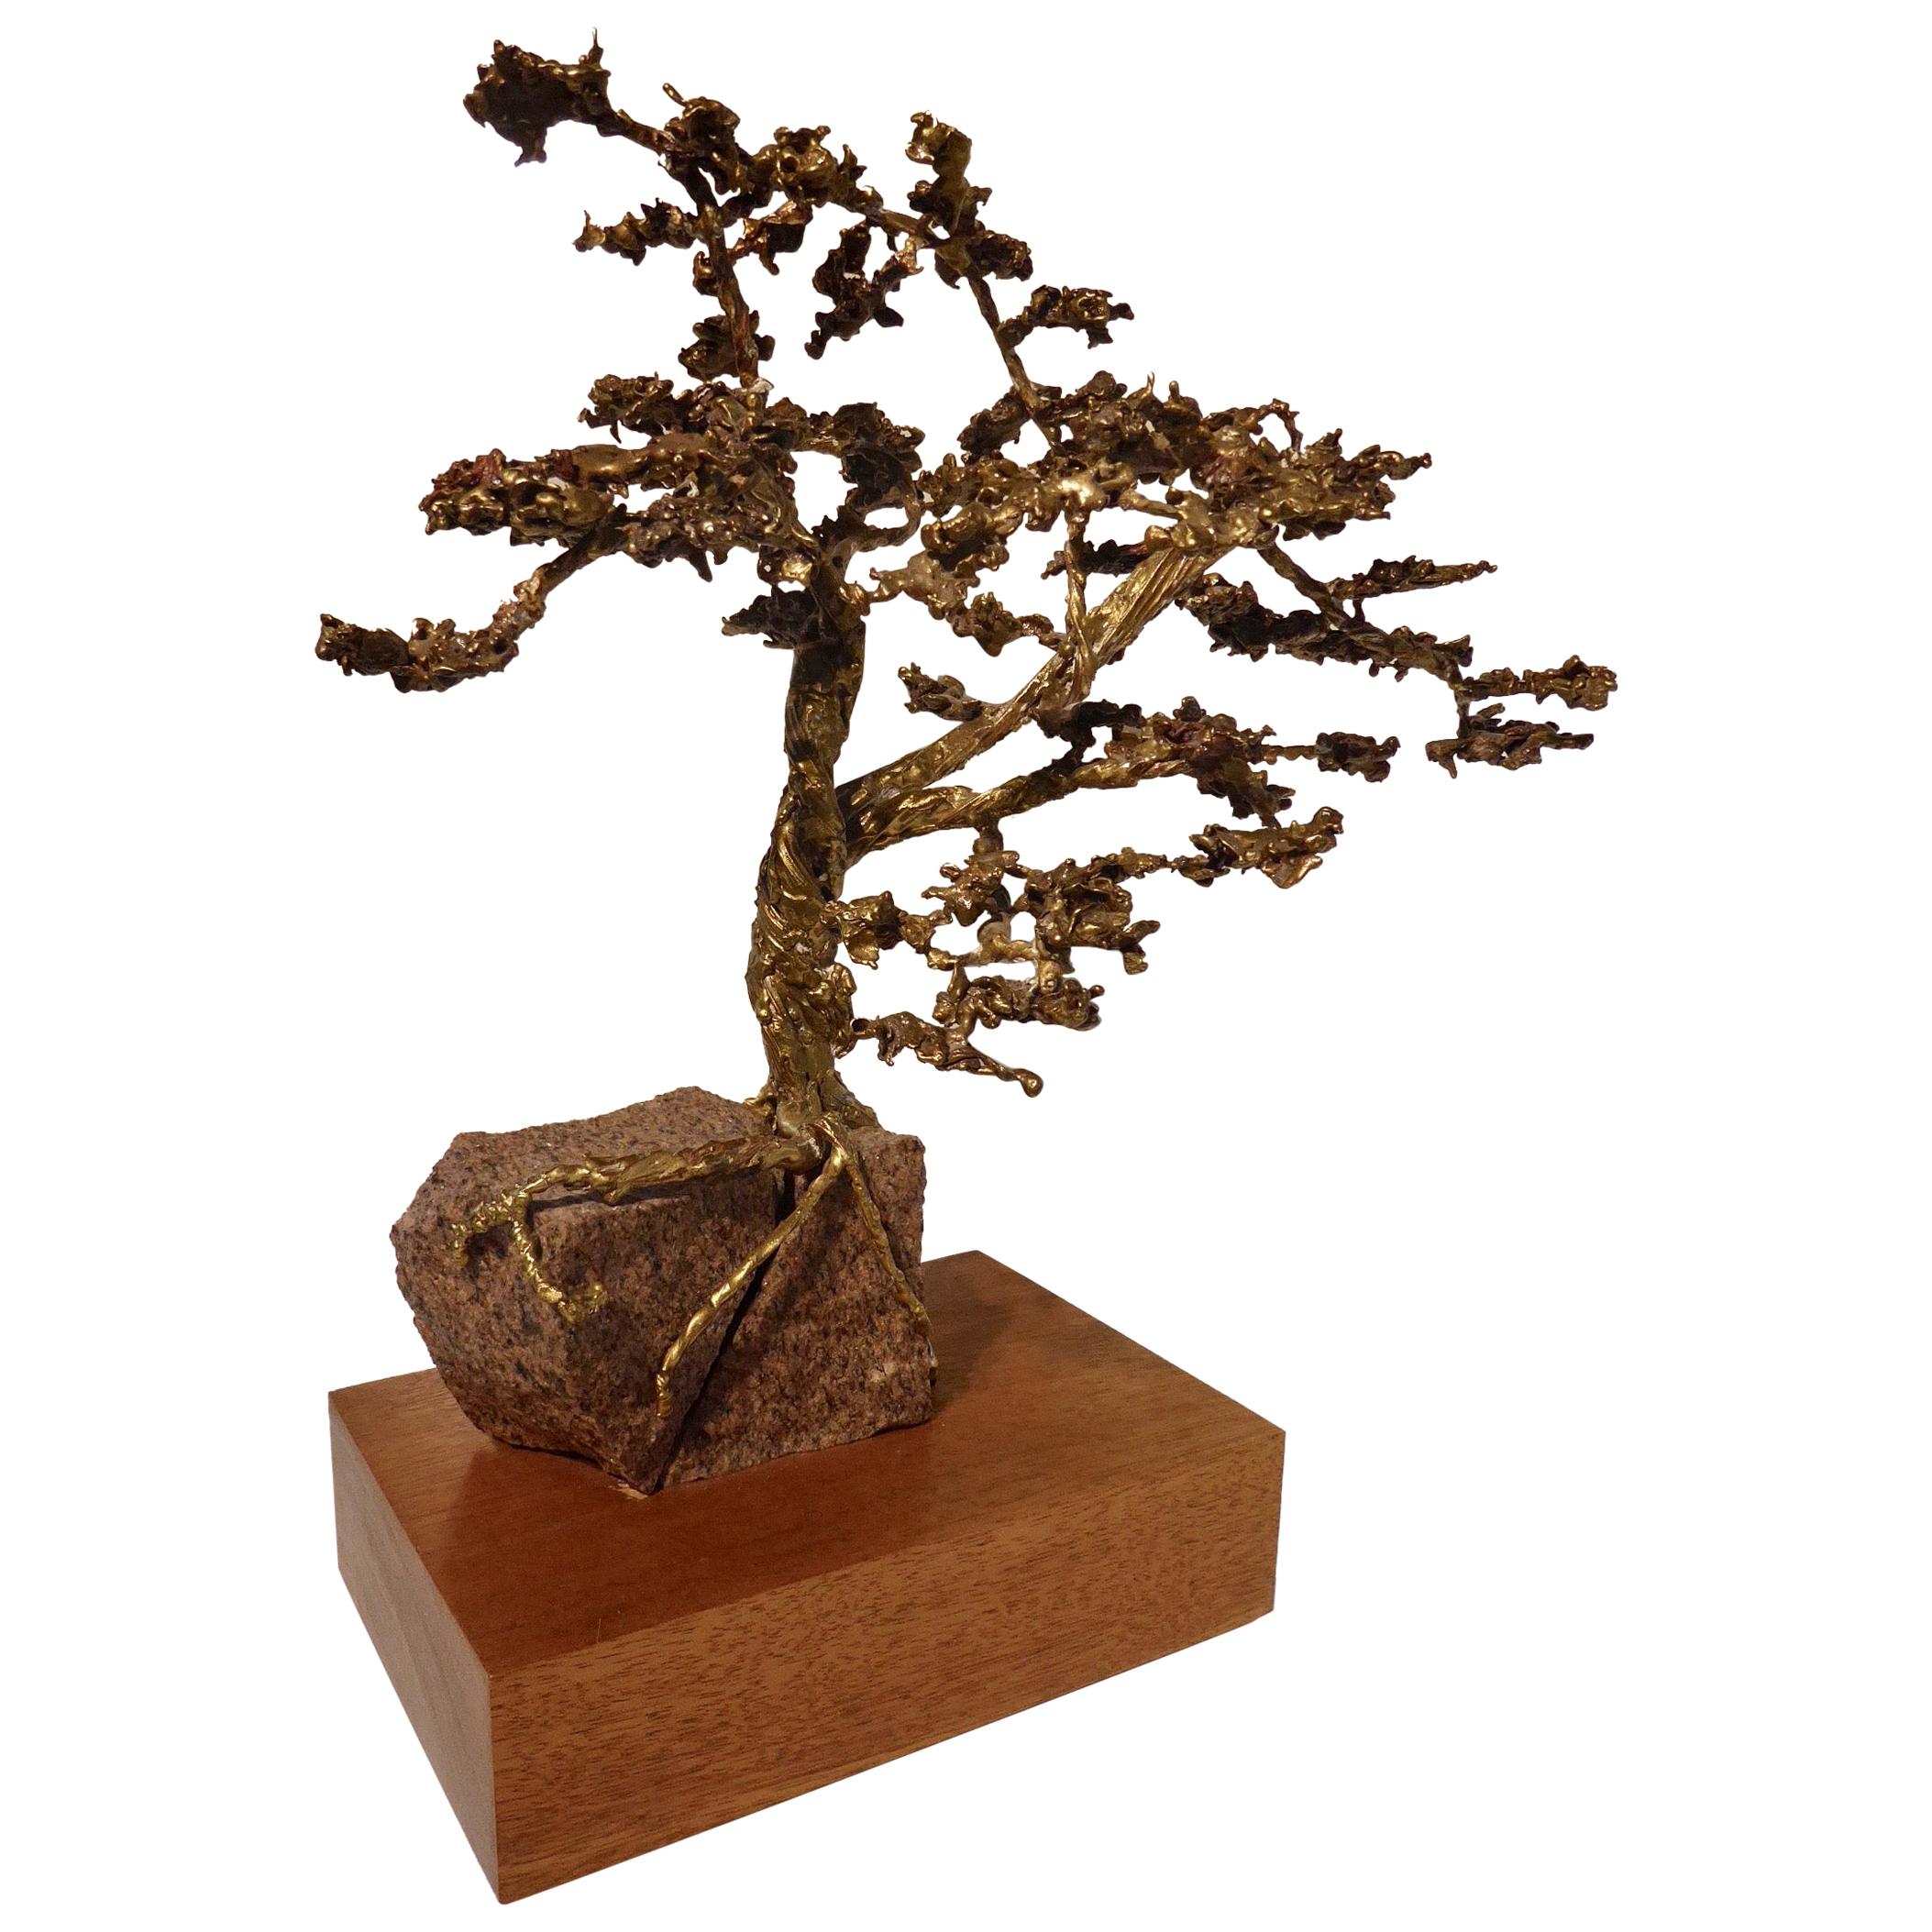 Hand-Sculpted Bronze Bonsai Tree by American Artist Jack S. Chase, circa 1979